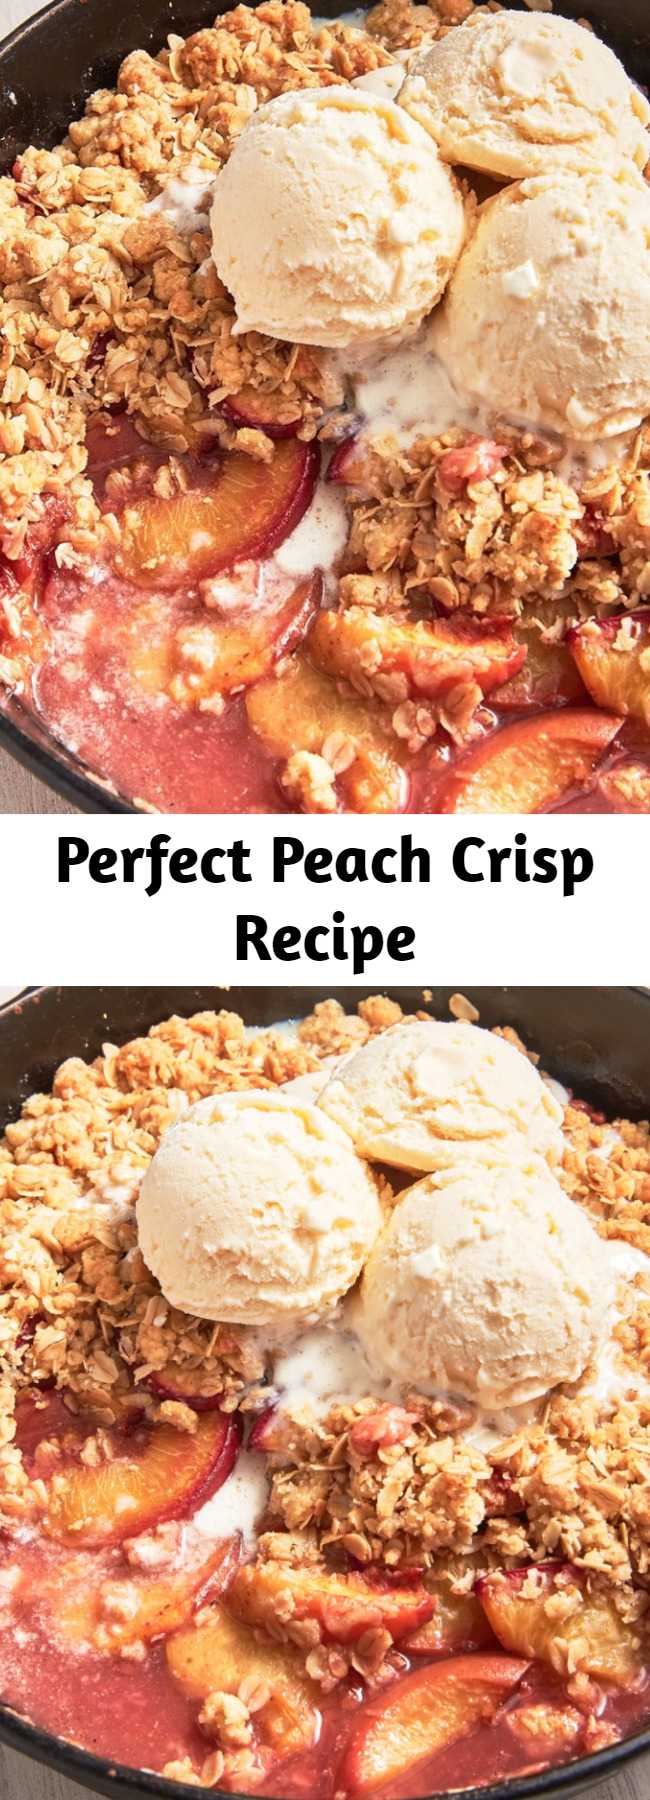 Perfect Peach Crisp Recipe - Peach Crisp is an old-fashioned delight that never fails to please. Always a crowd pleaser.